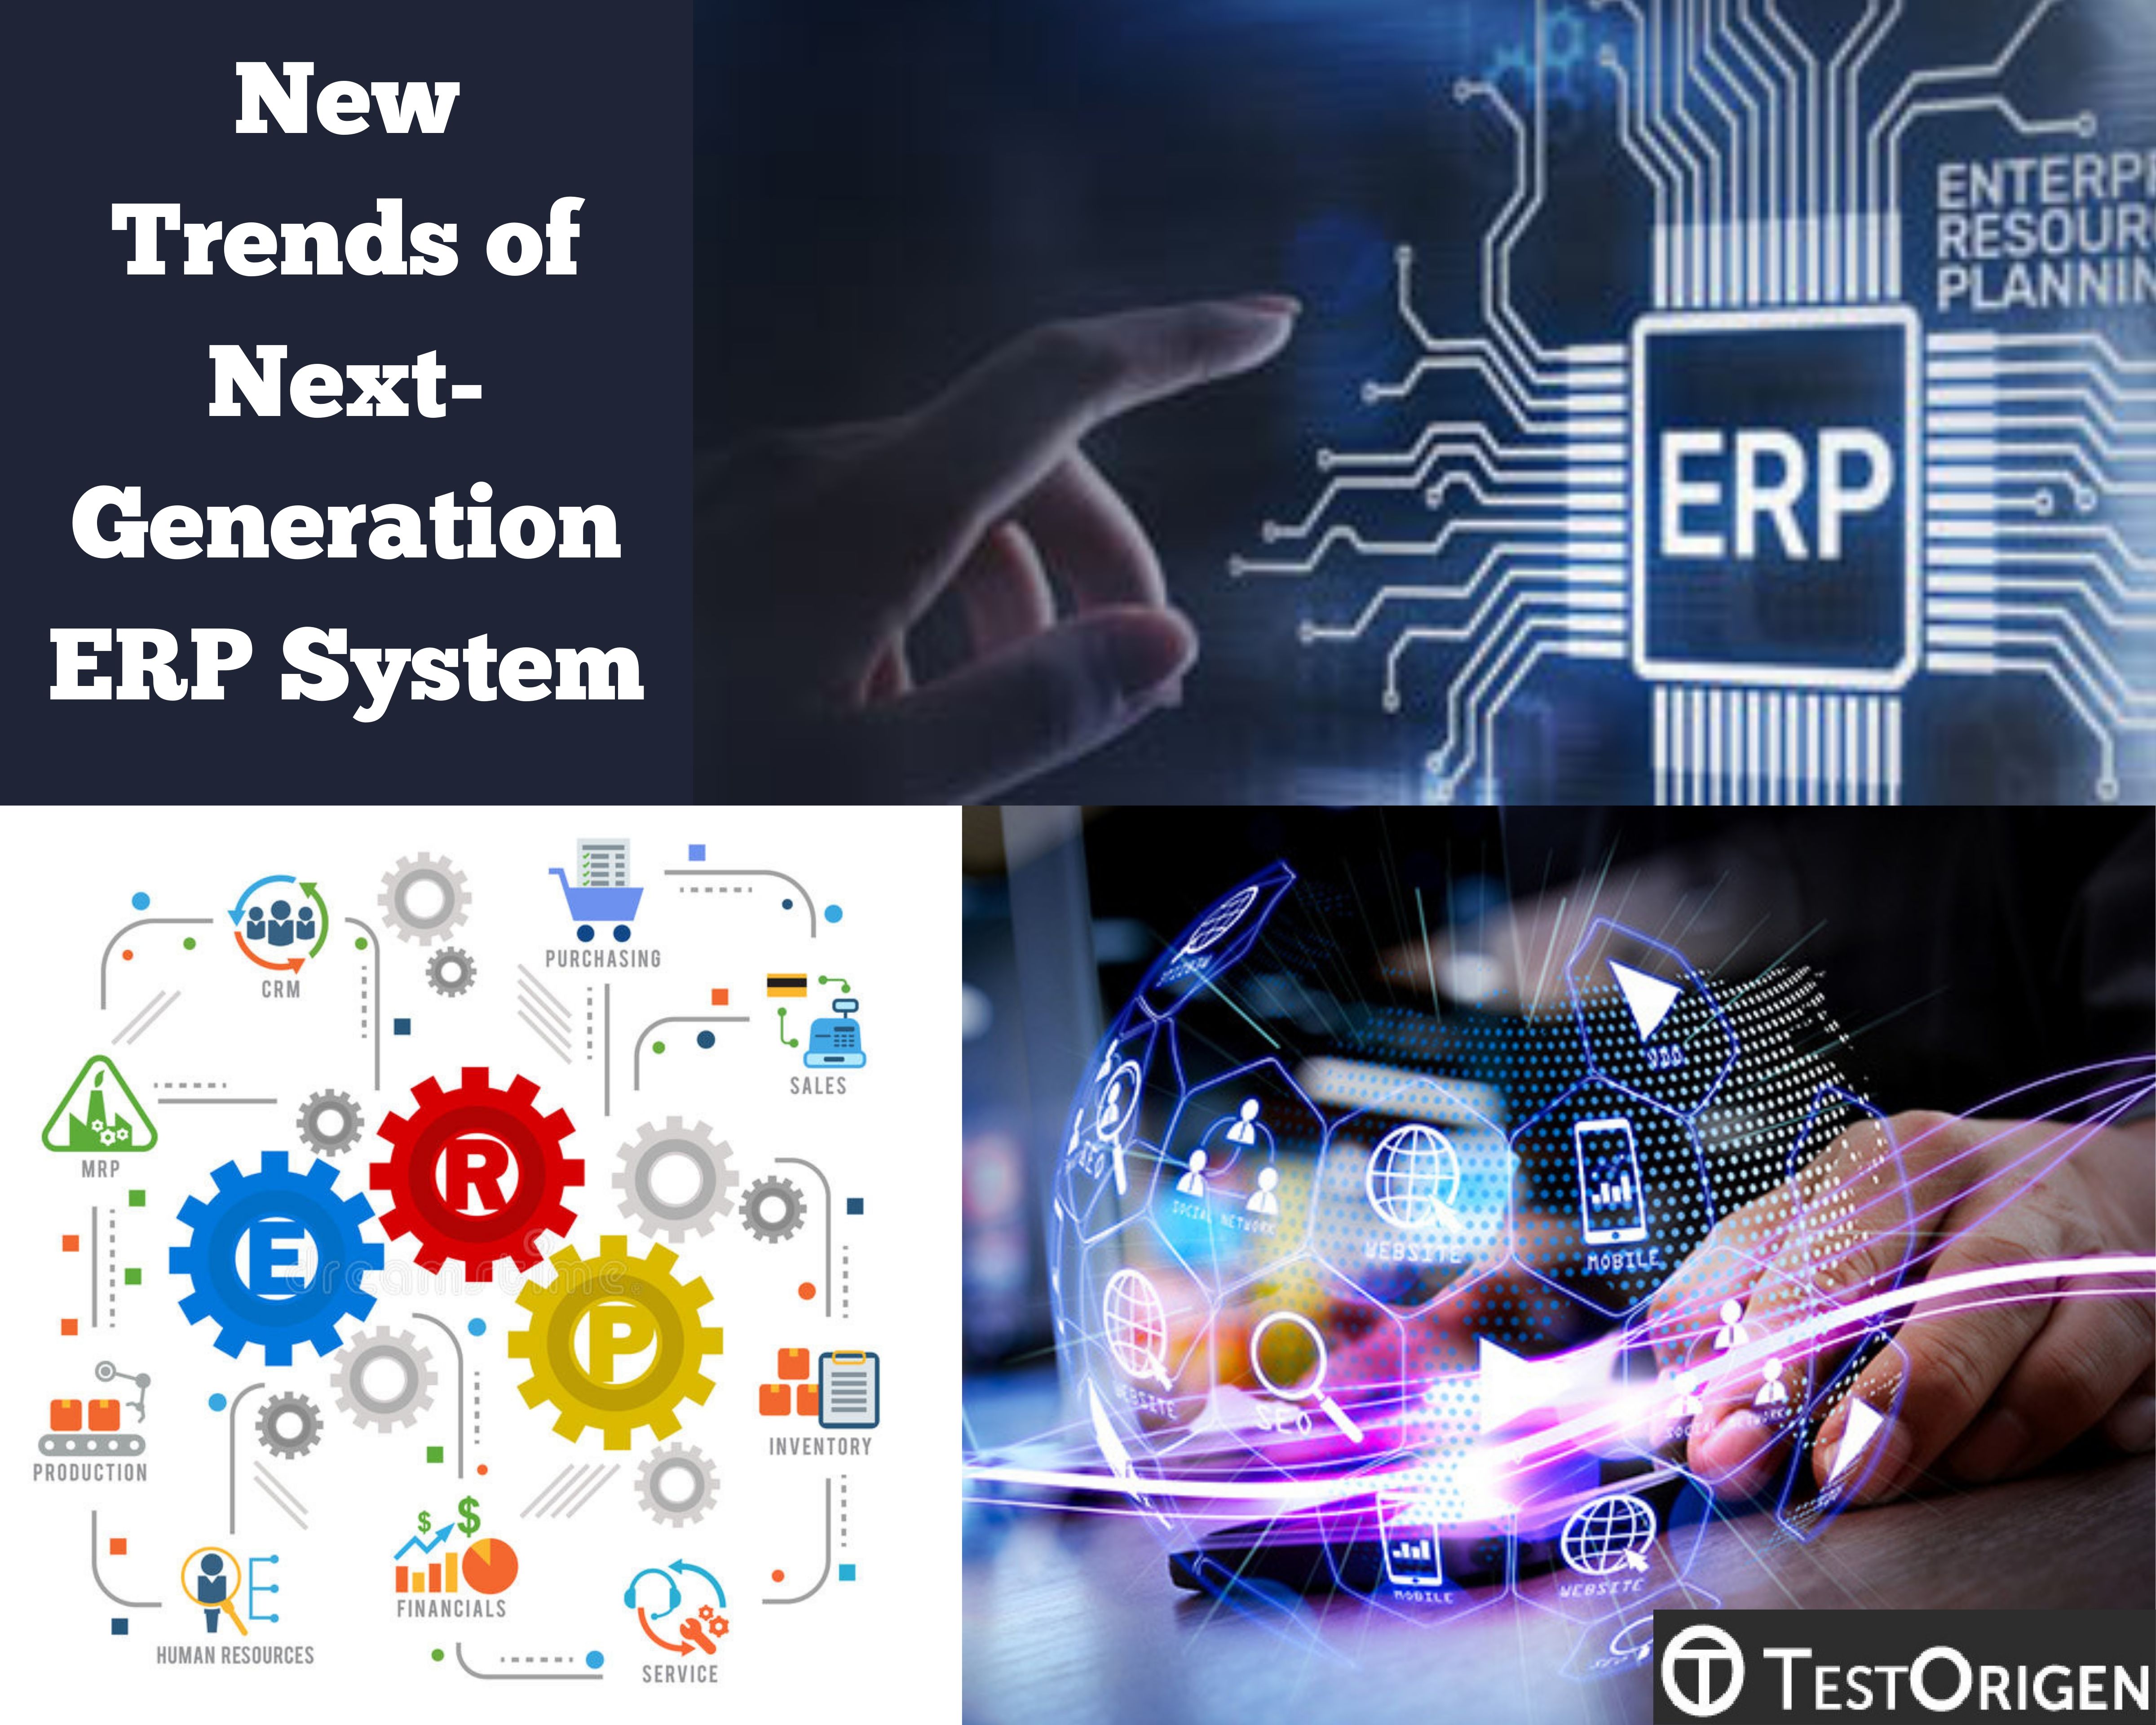 New Trends of Next-Generation ERP System. erp system